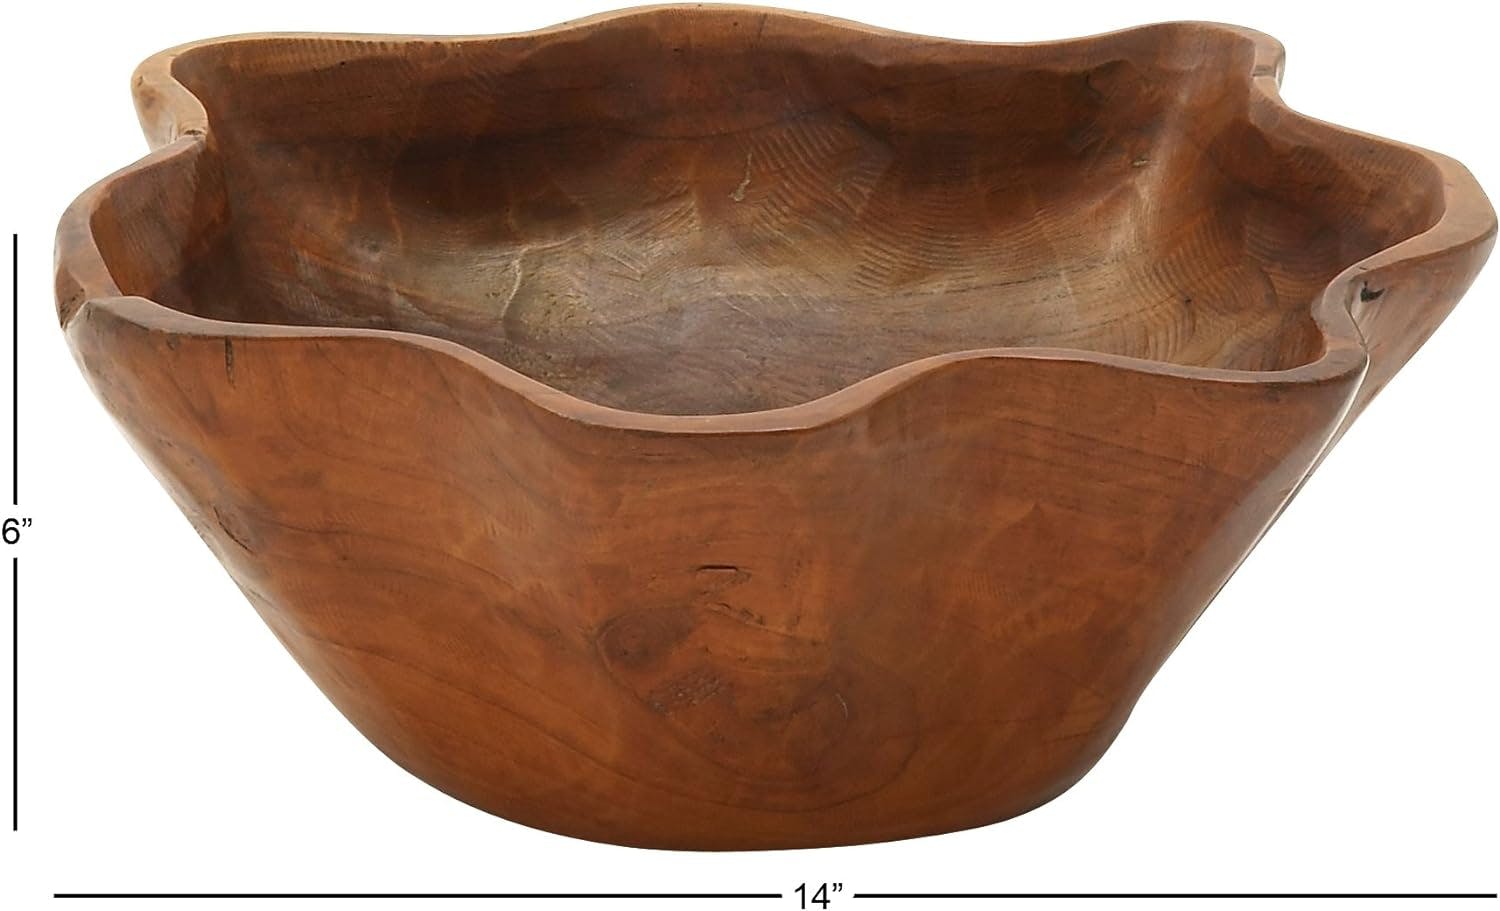 Handcrafted Teak Wood Lacquered Decorative Bowl with Stand, 14" x 12"